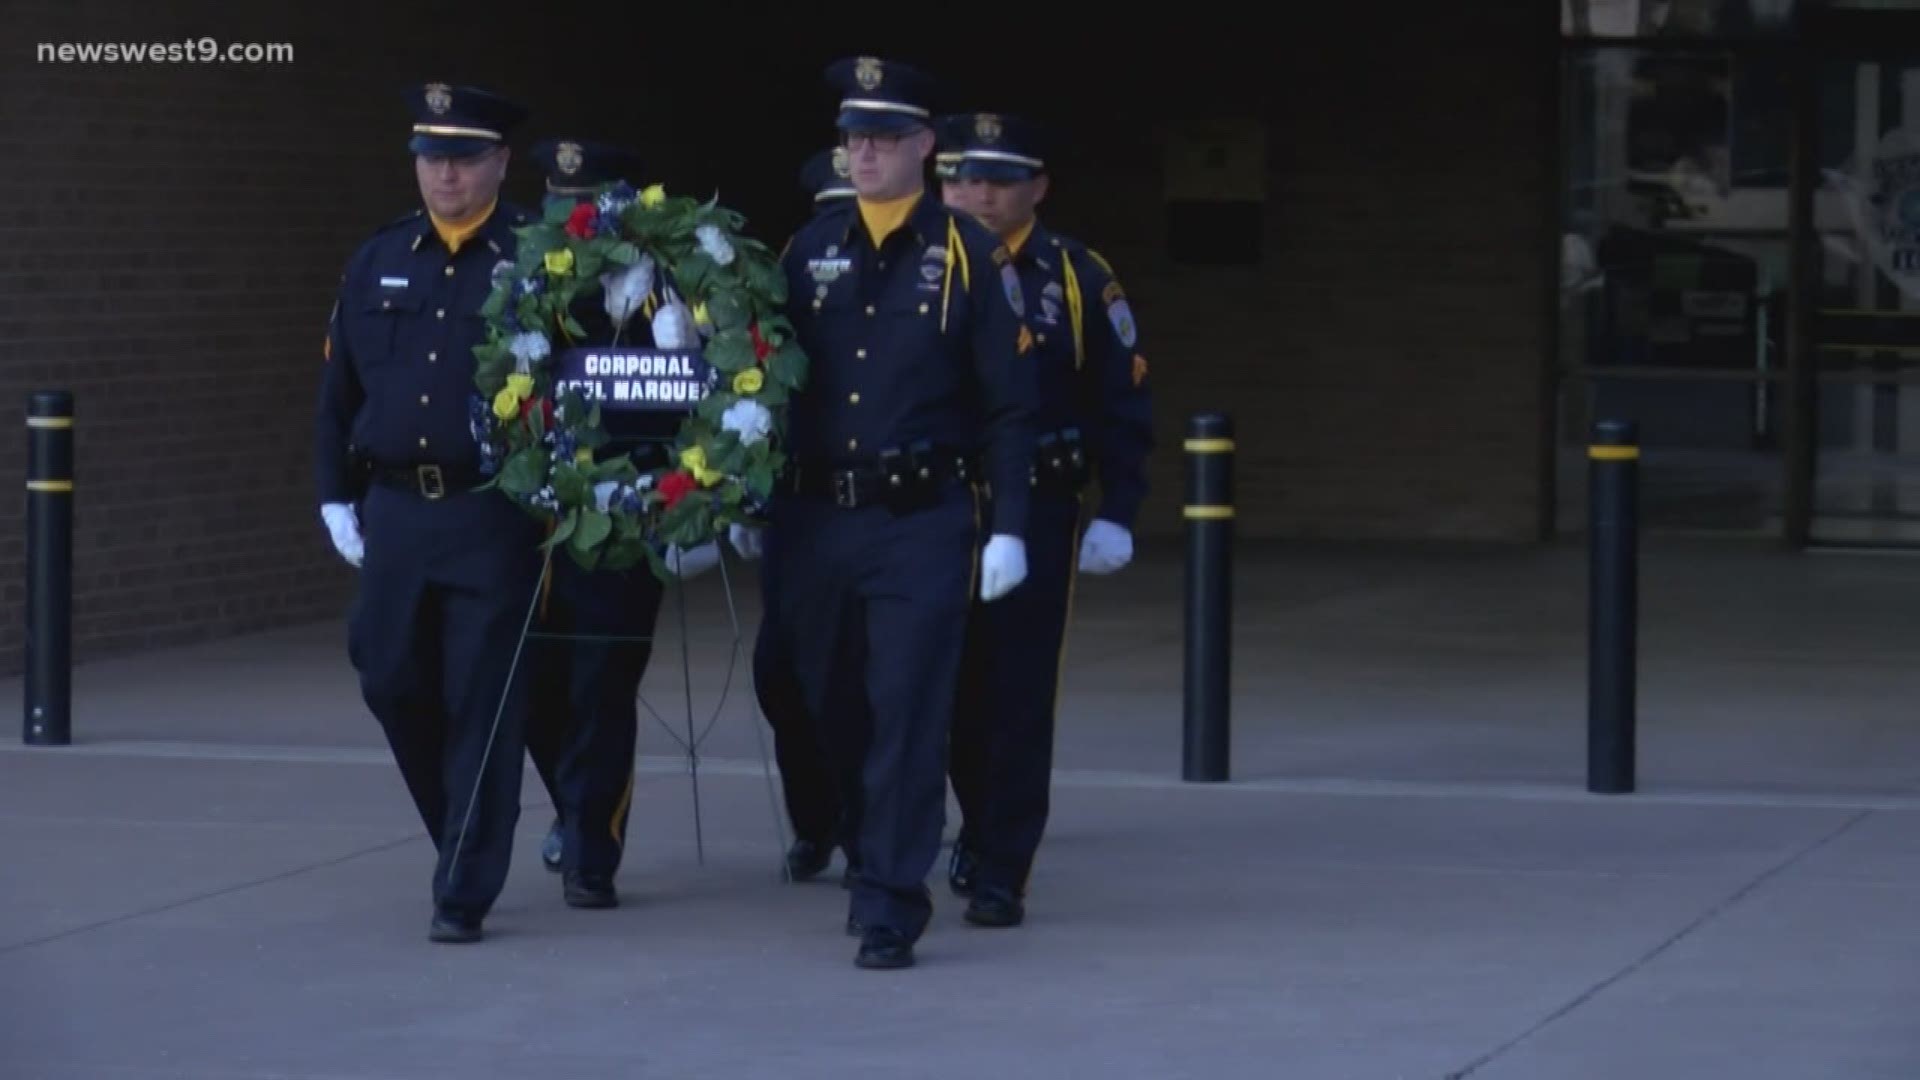 The honor guard placed a wreath at the memorial statue honoring an officer killed in the line of duty in 2007.